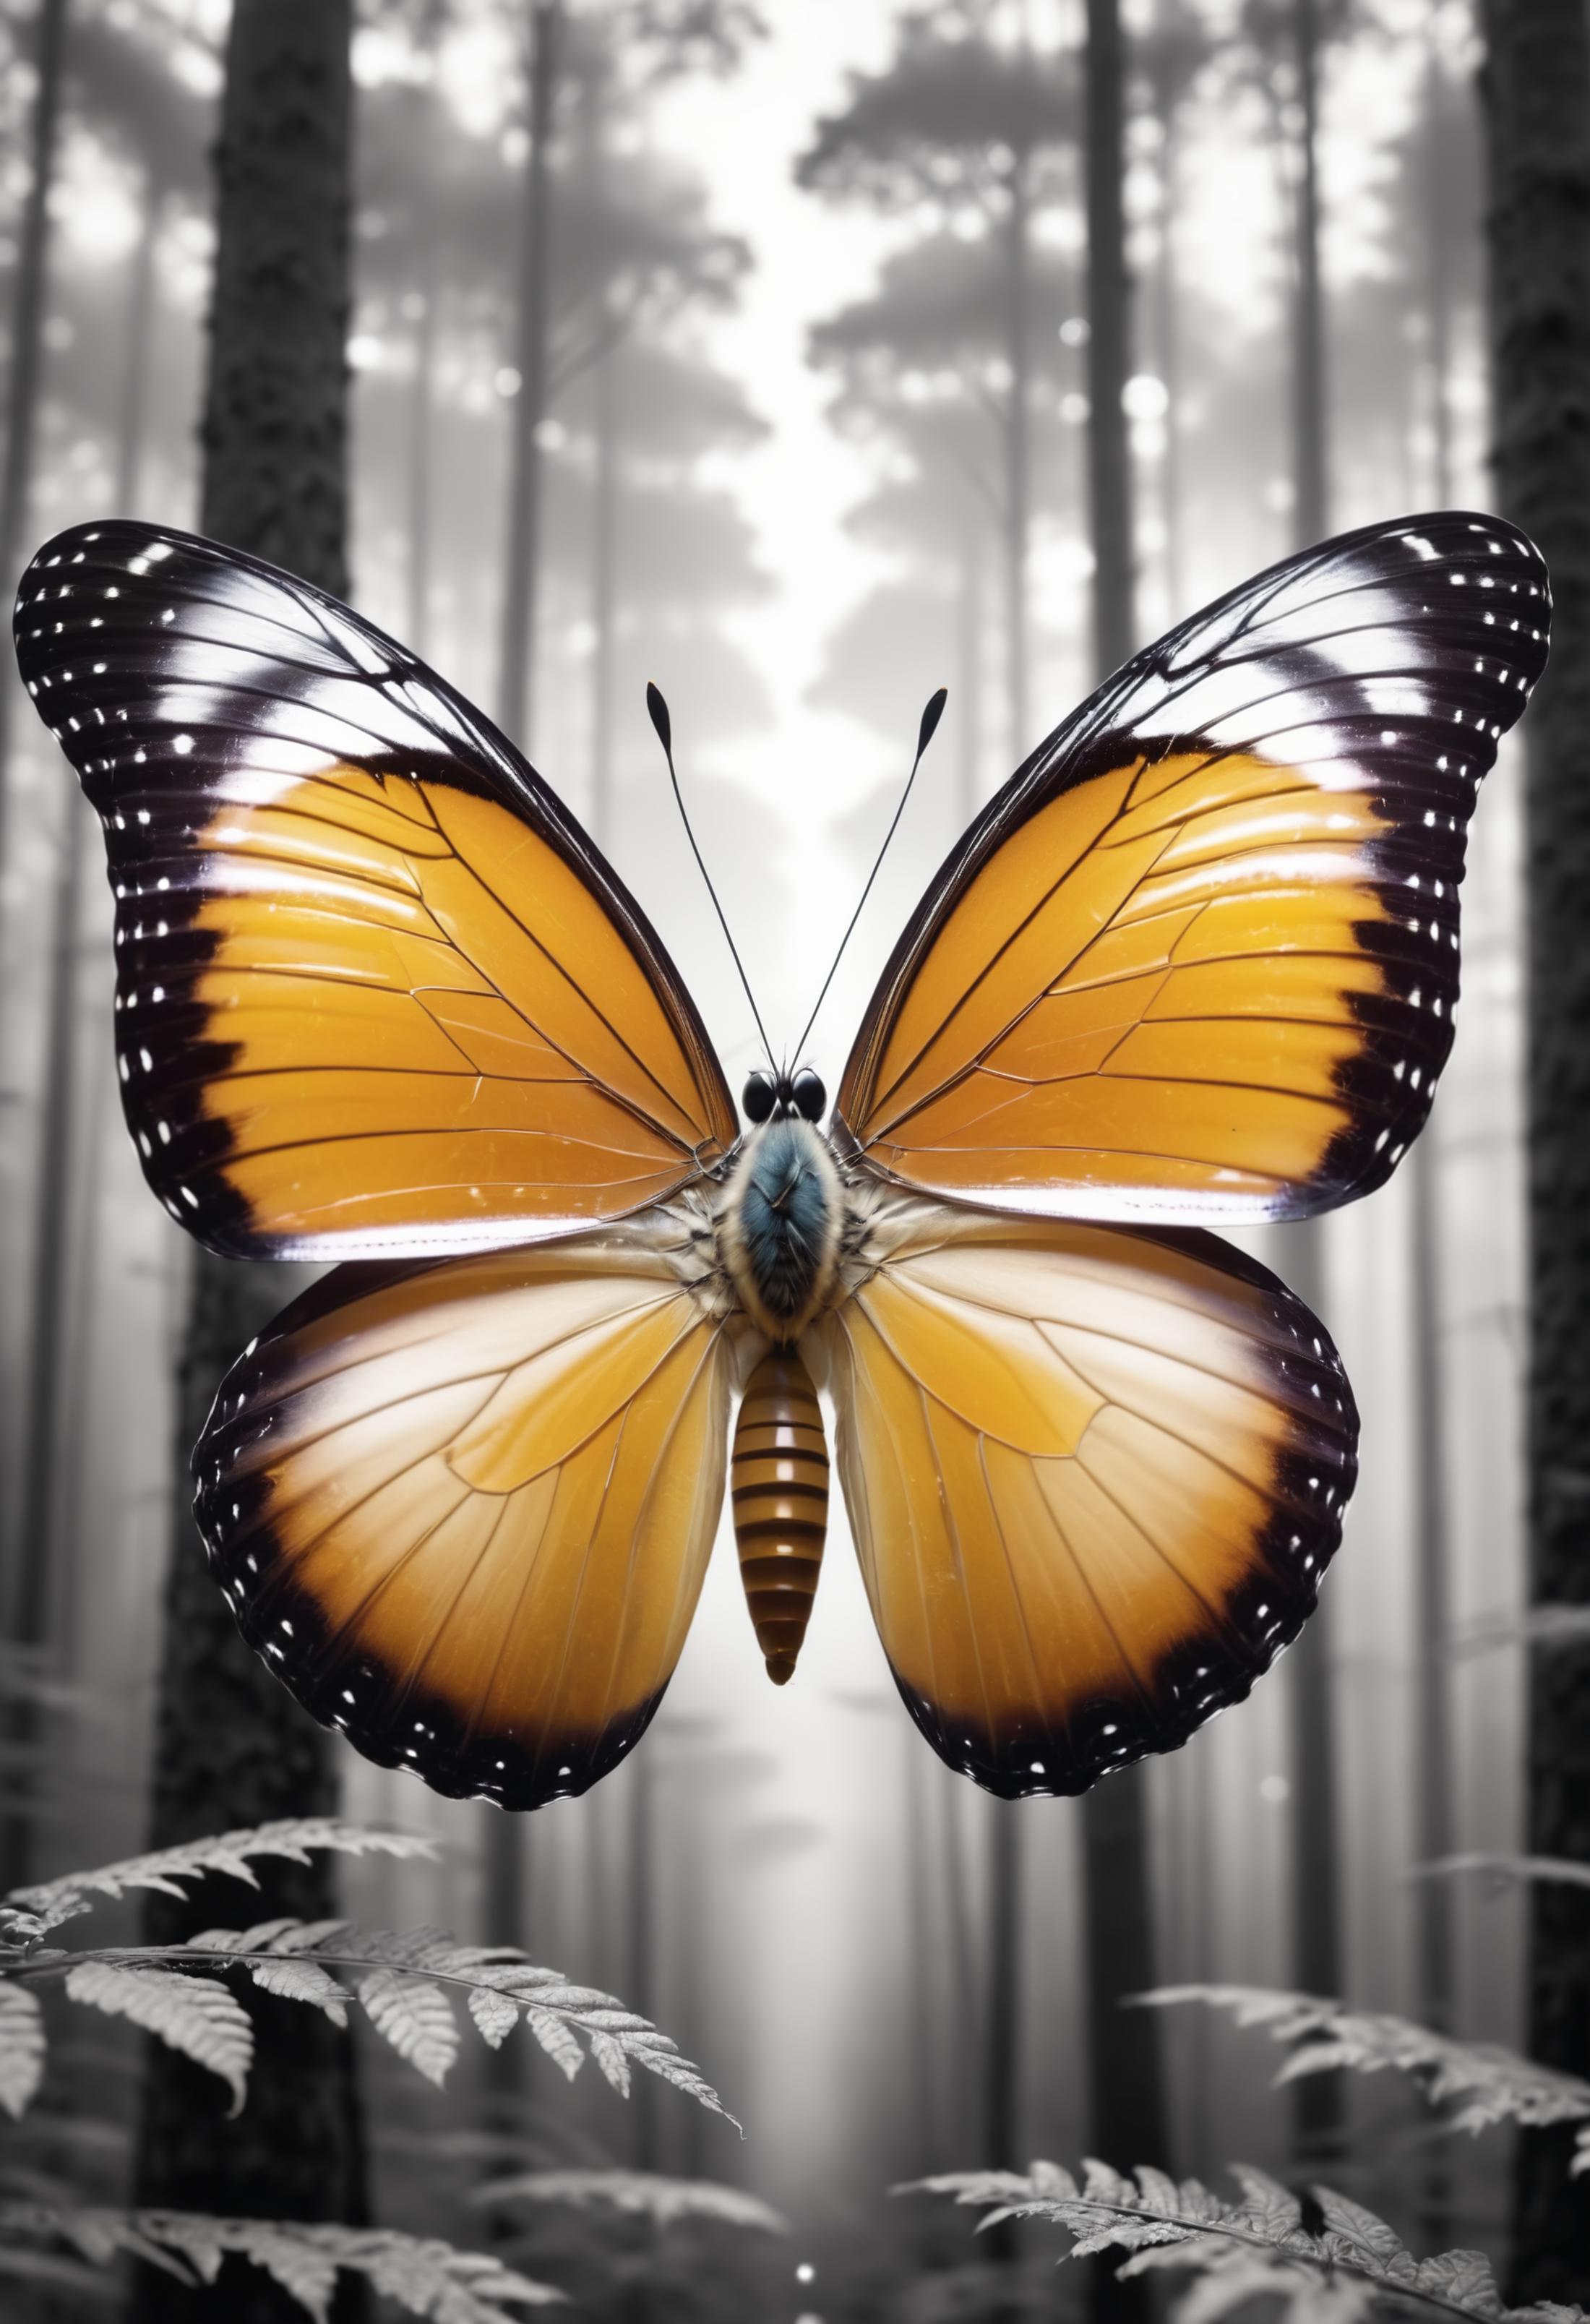 A large butterfly with black and orange wings is perched on a tree branch.